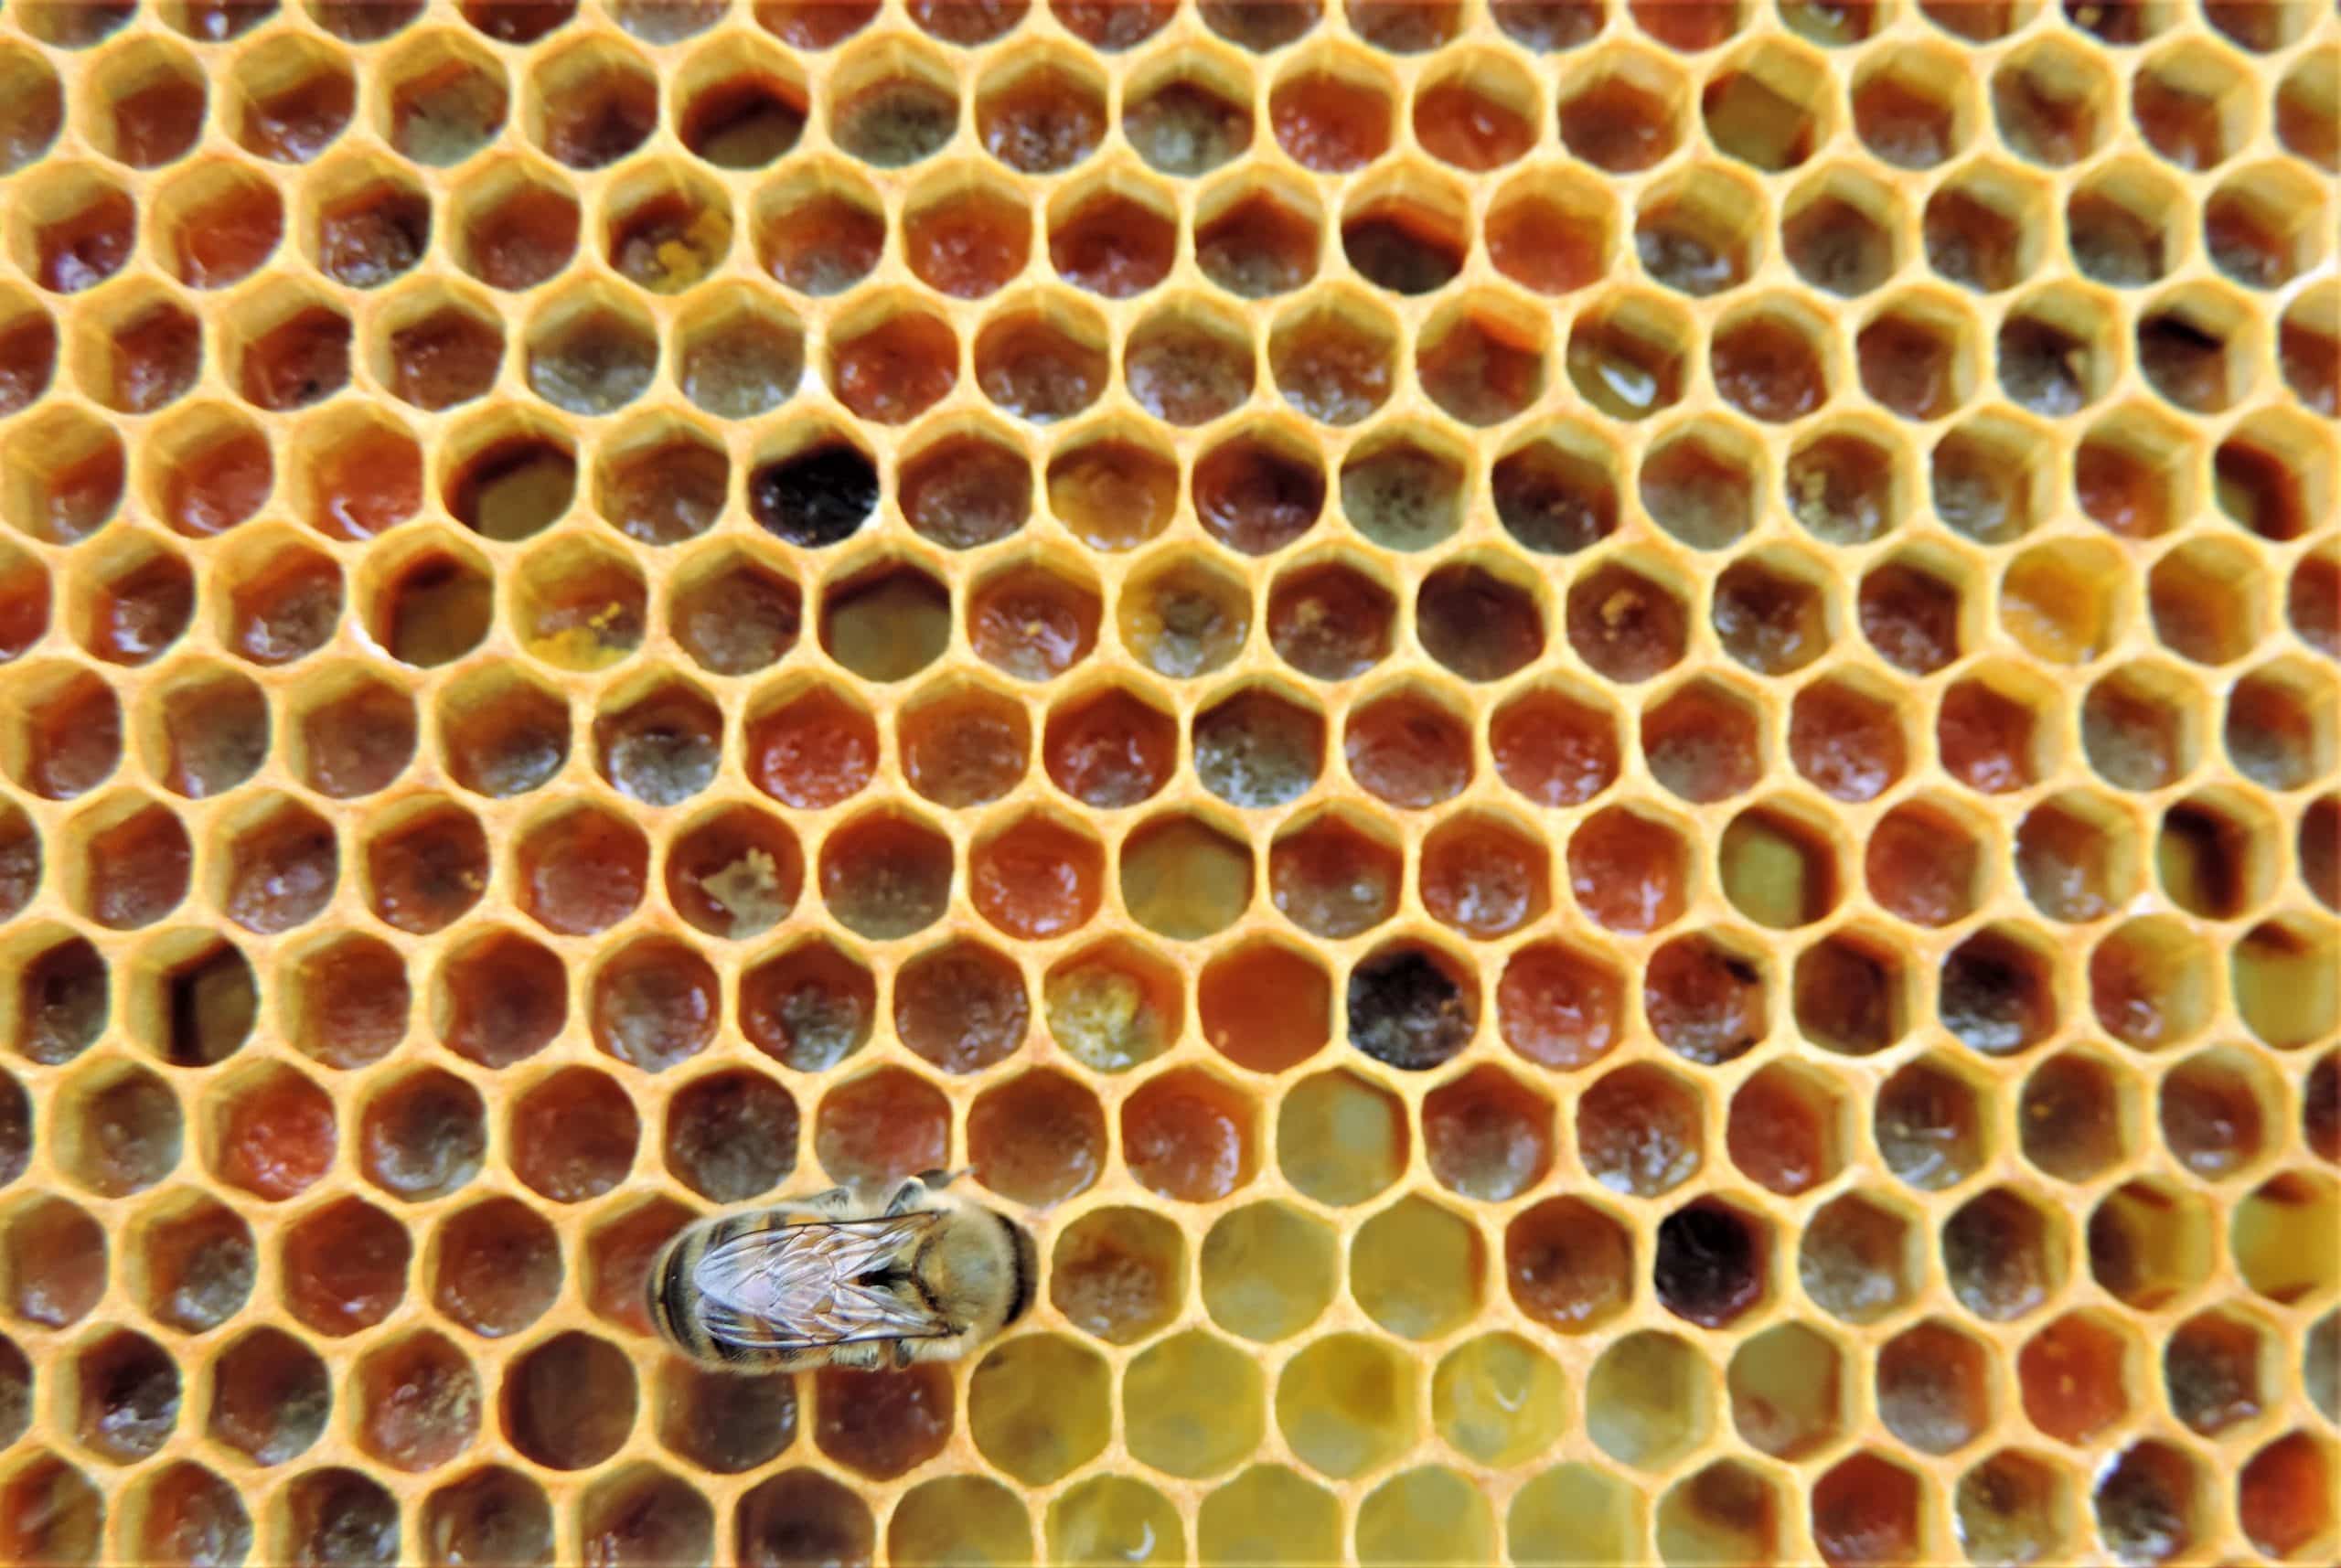 15-facts-about-bees-and-hives